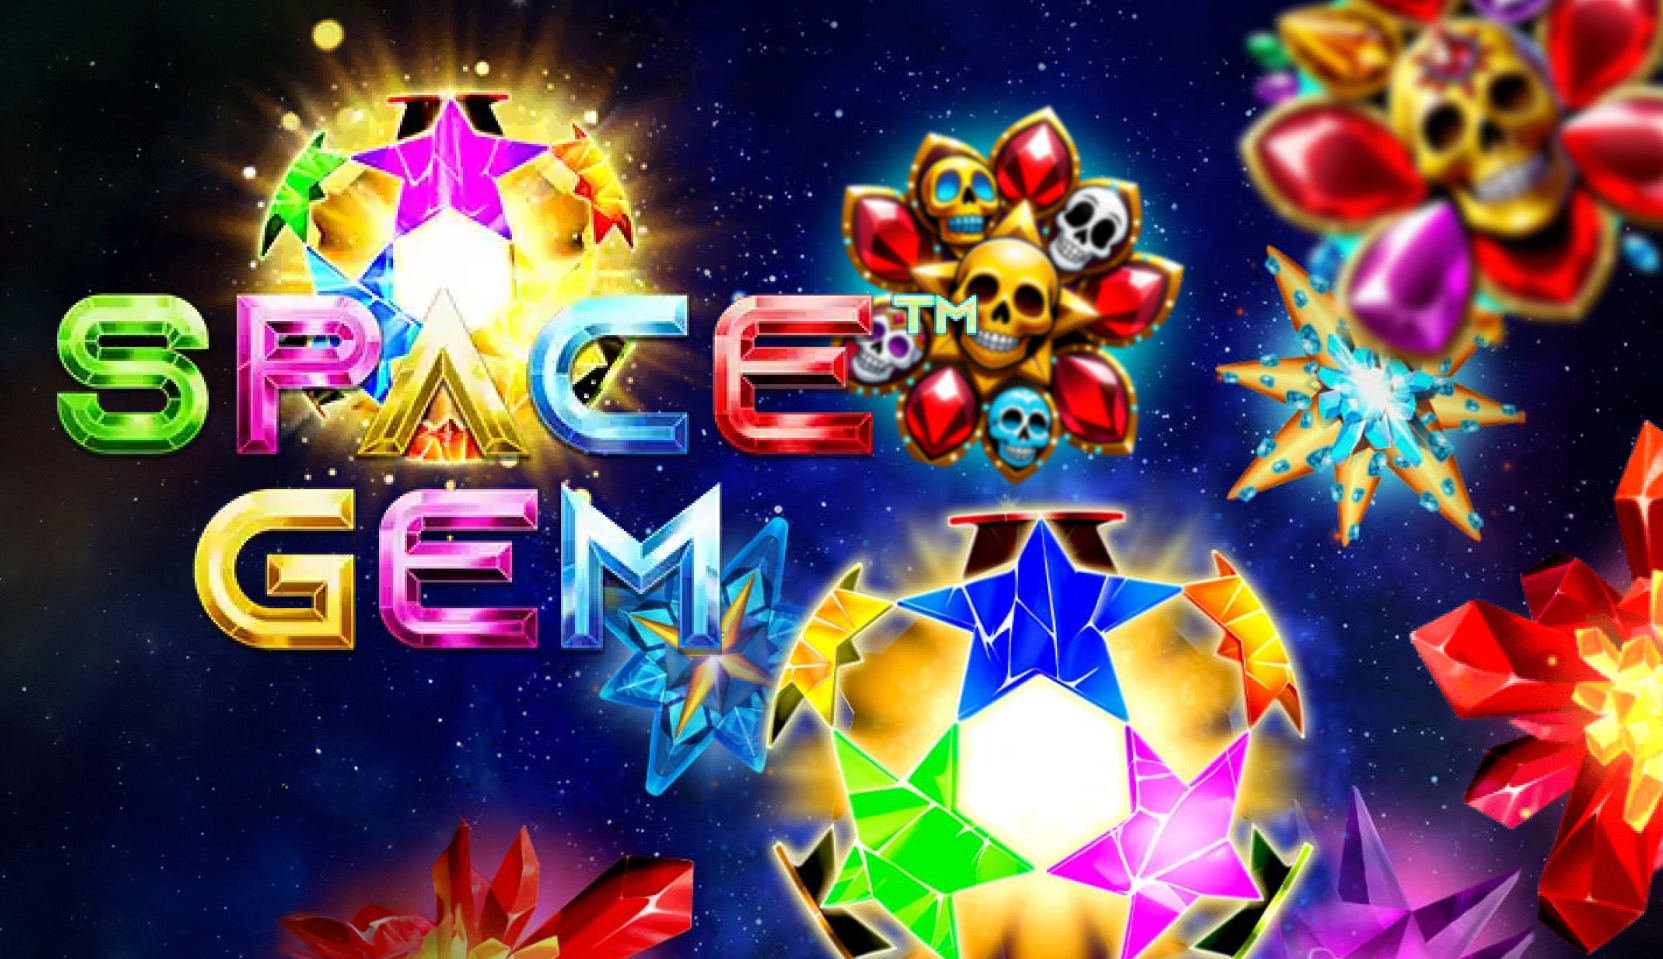 Colorful 'Space Gem' slot game logo with sparkling crystals and skull icons in a starry space